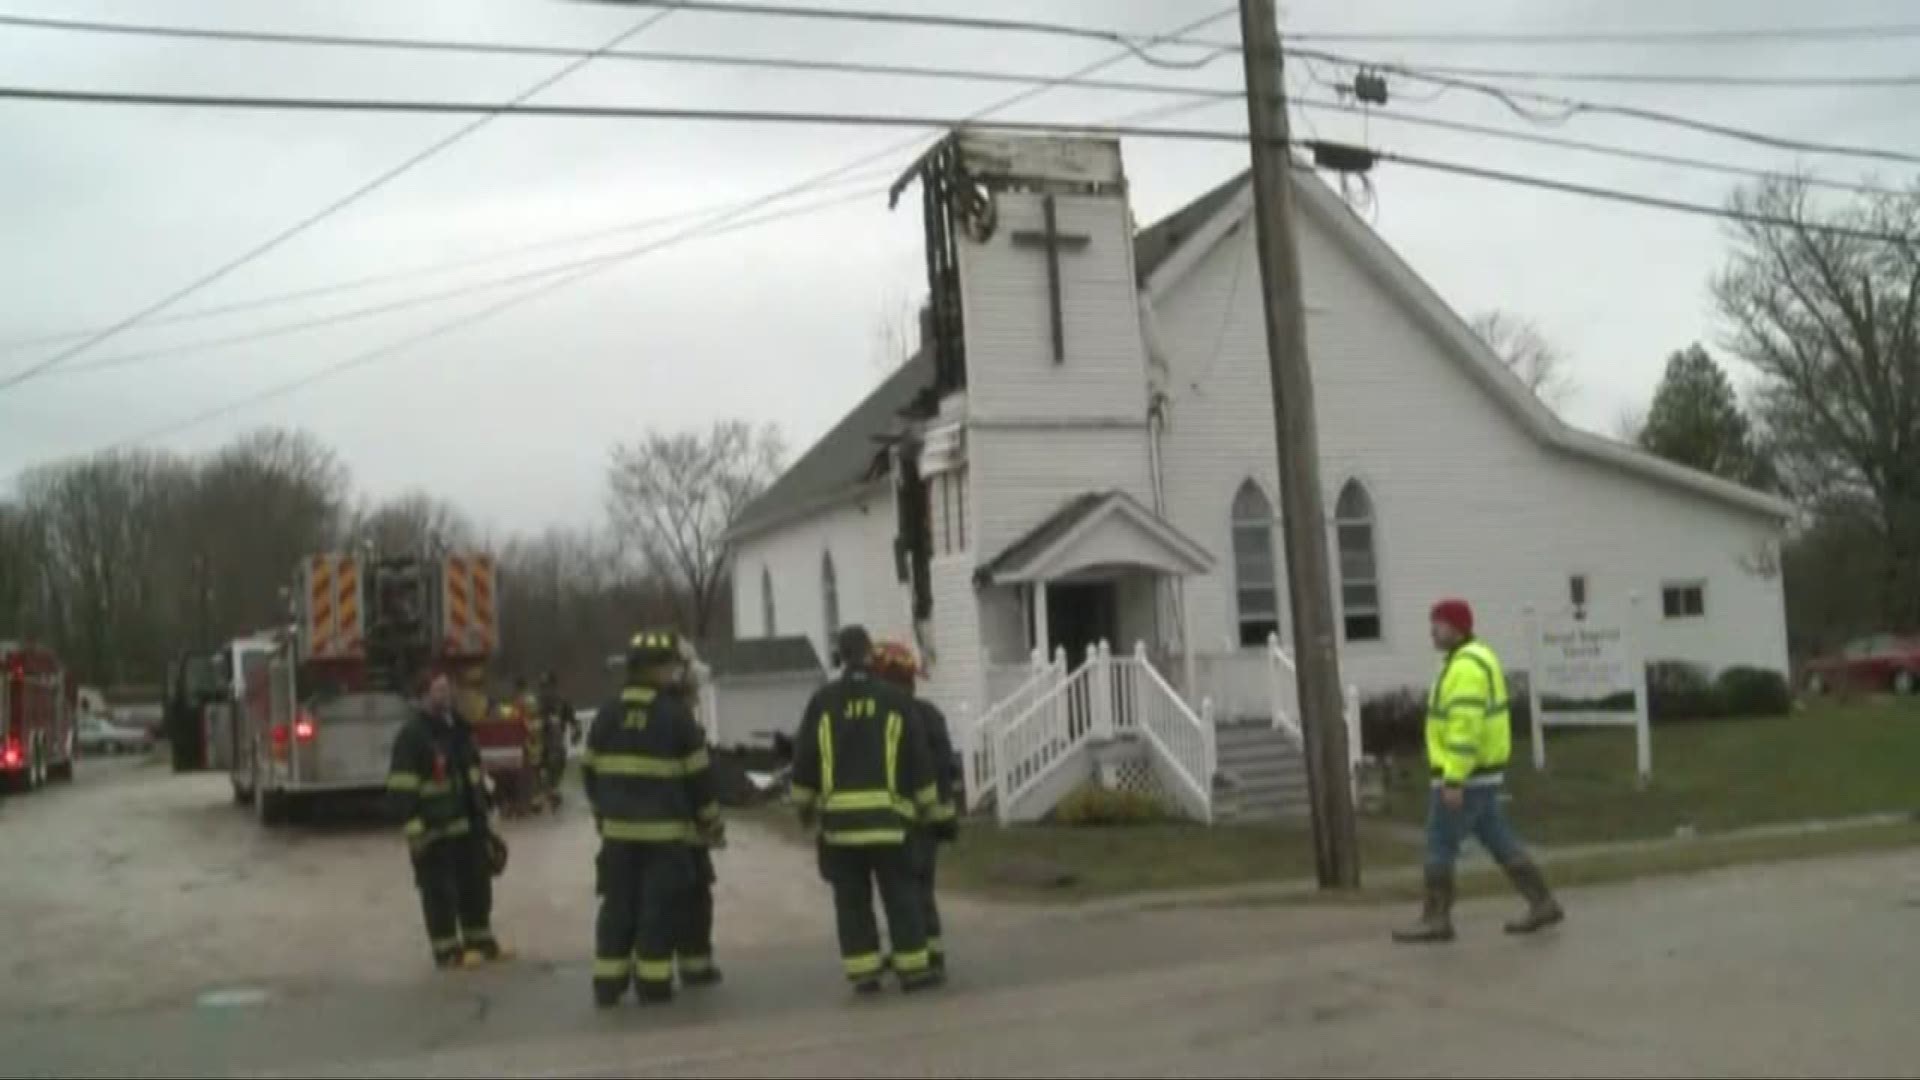 March 1, 2017: An Ashtabula County church caught fire after it was struck by lightning during the overnight storms Wednesday.